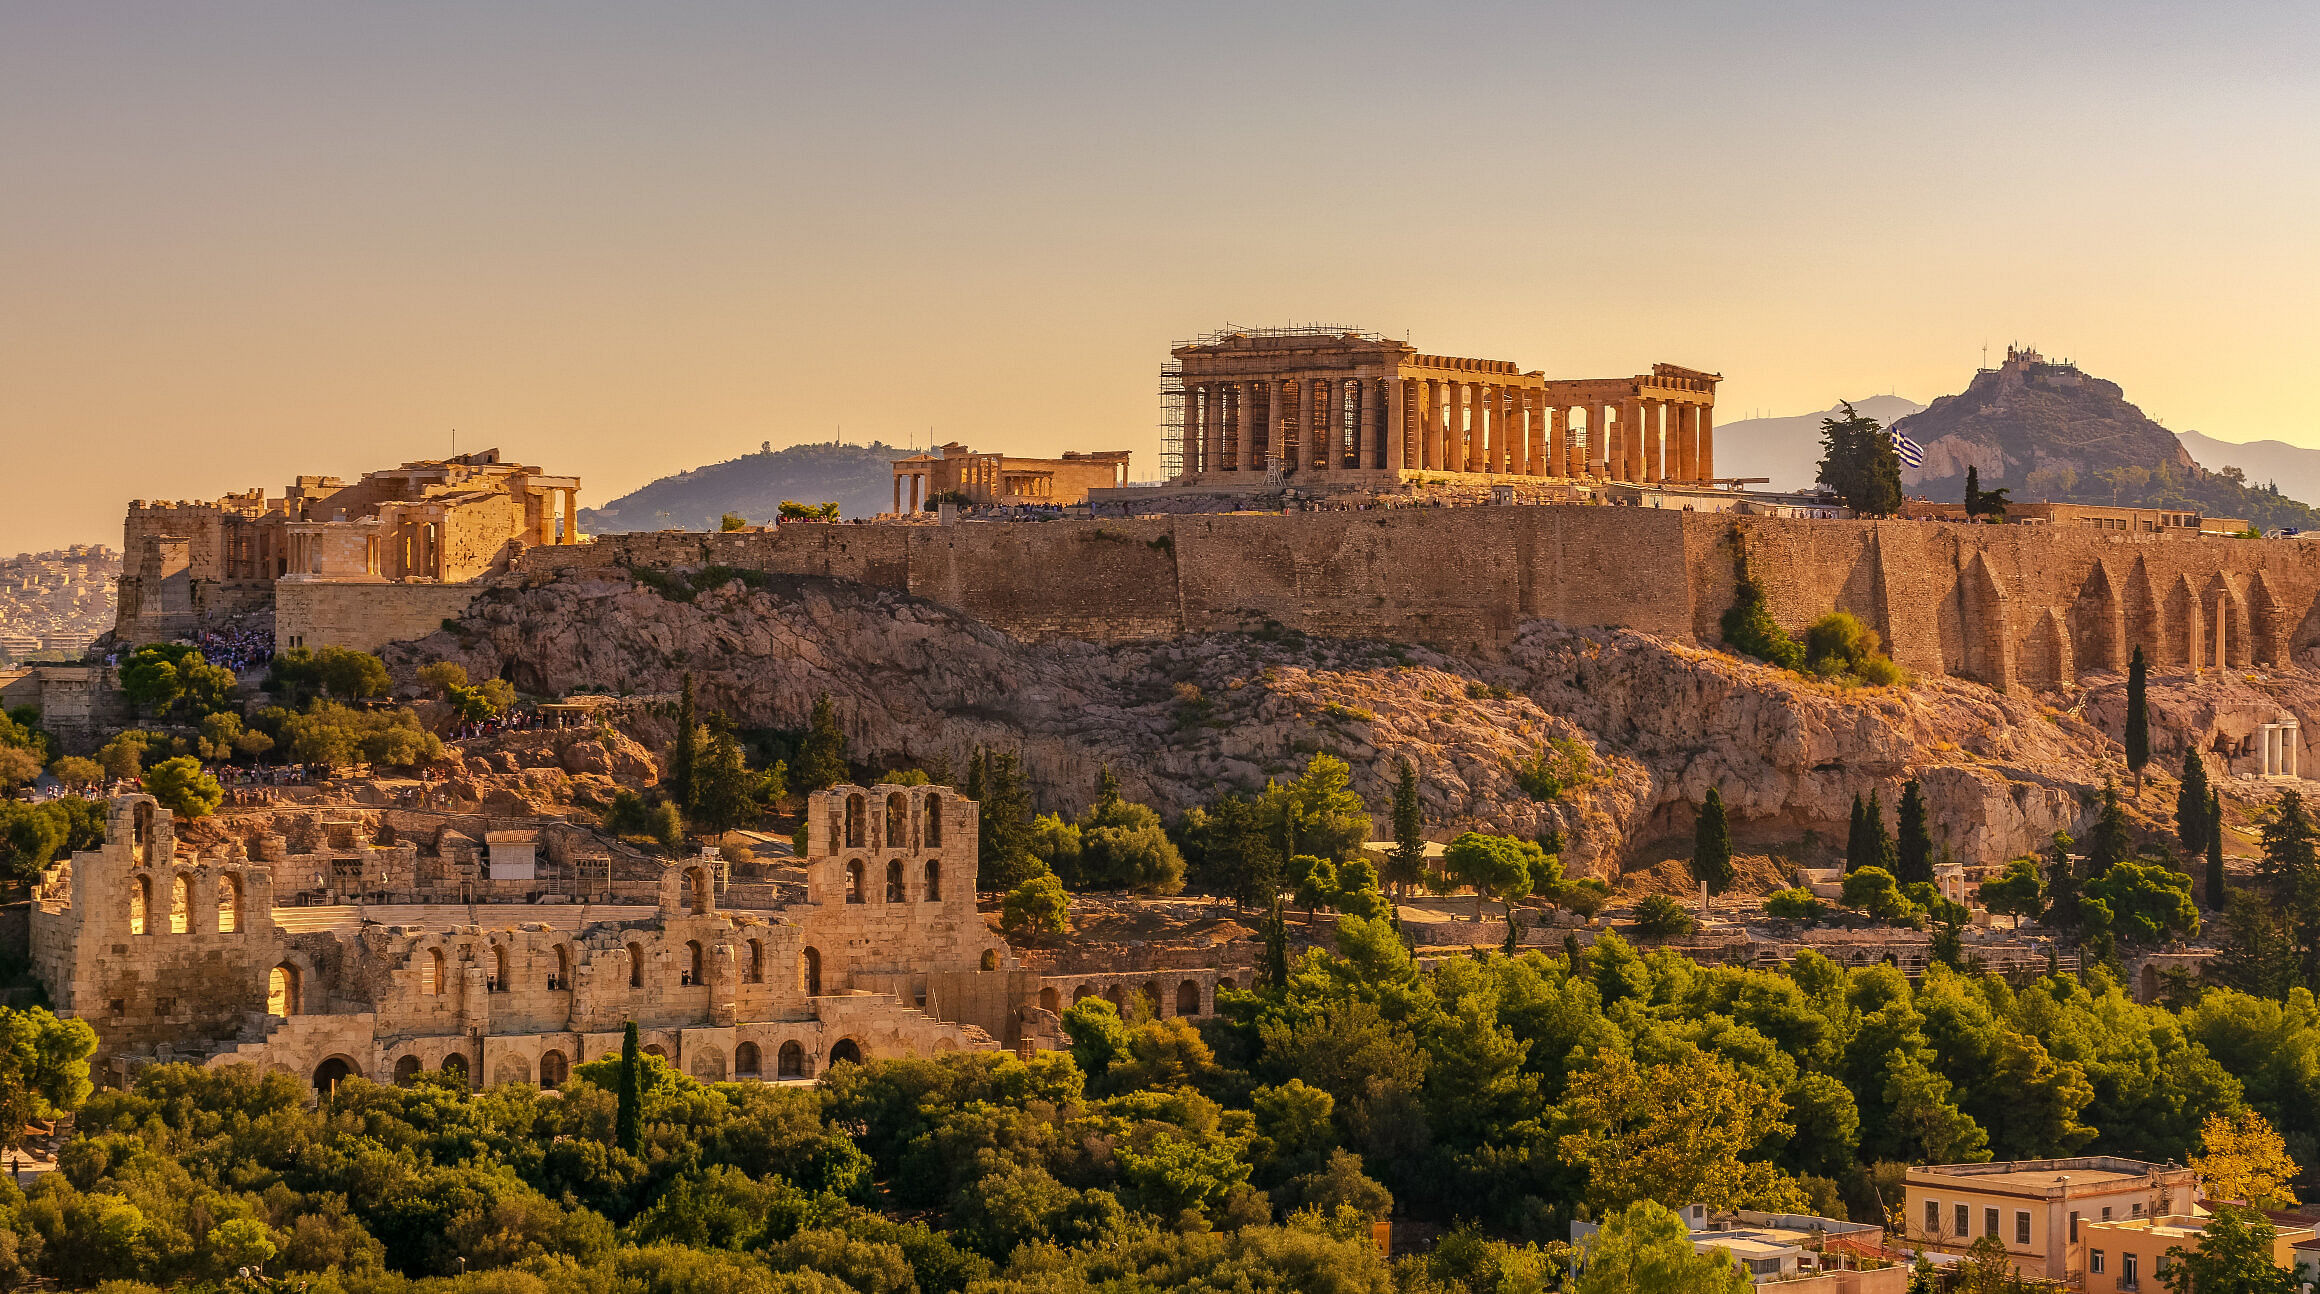 View of the Acropolis at sunset in Athens, Greece